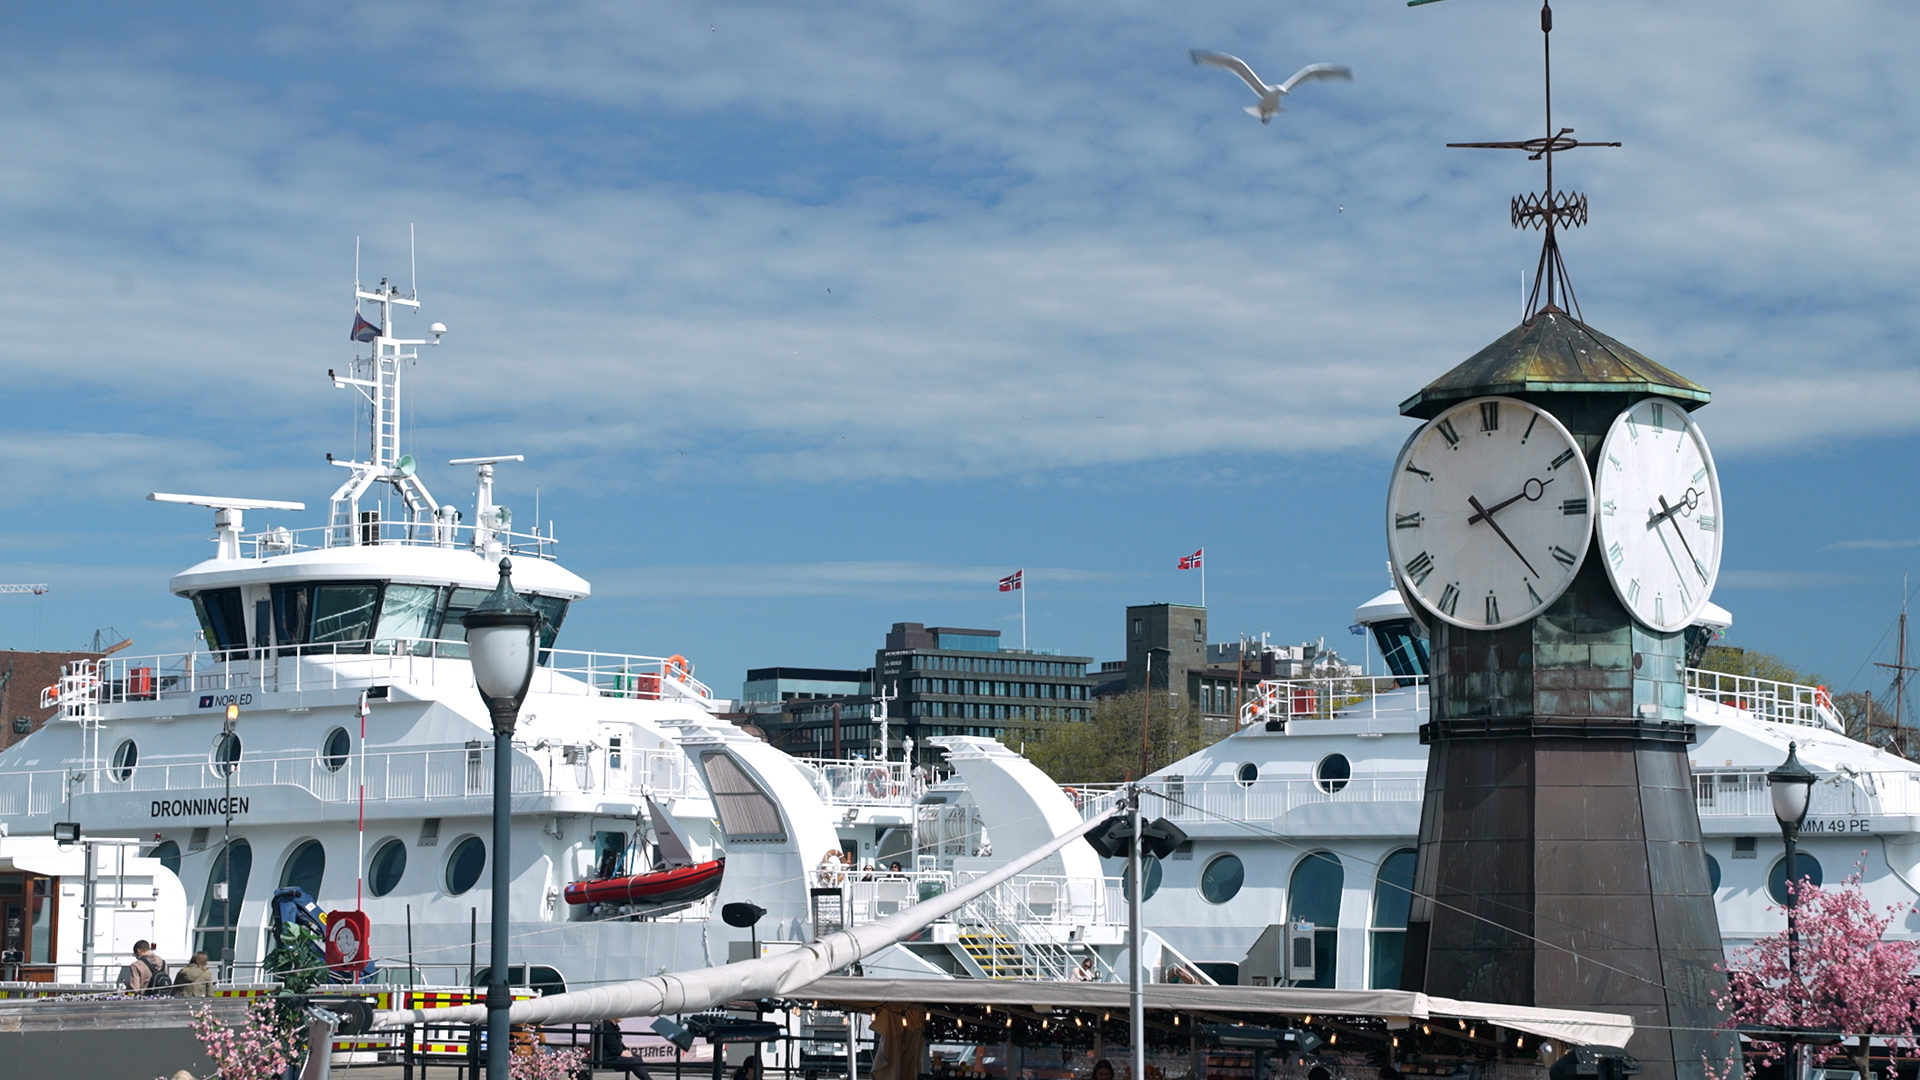 From Oslo's city center, numerous ferry lines take passengers to nearby islands. /Gasser/CGTN